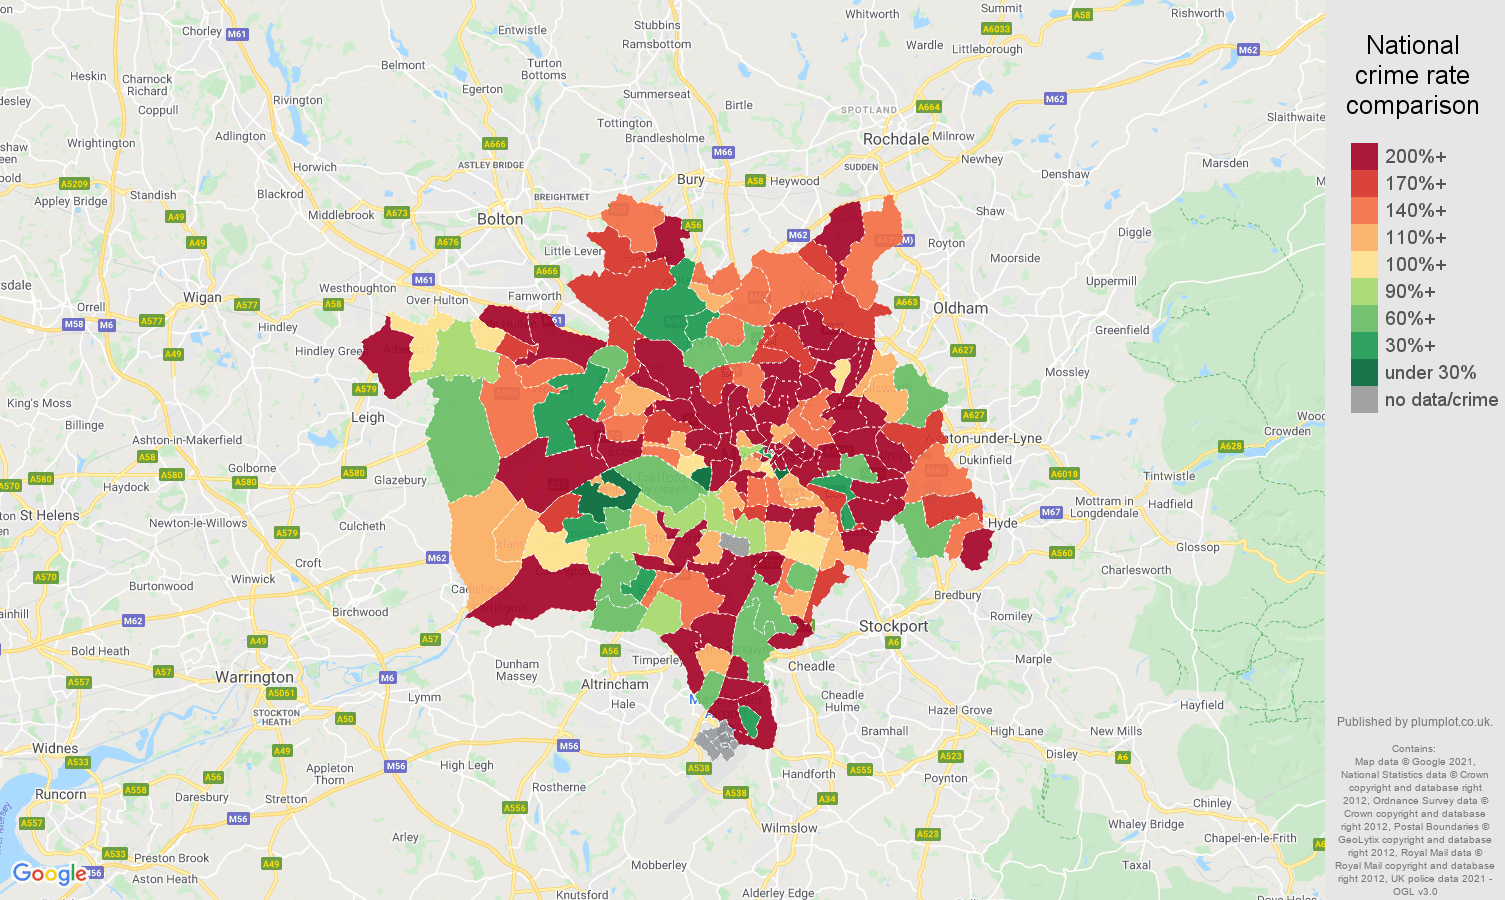 Manchester possession of weapons crime rate comparison map